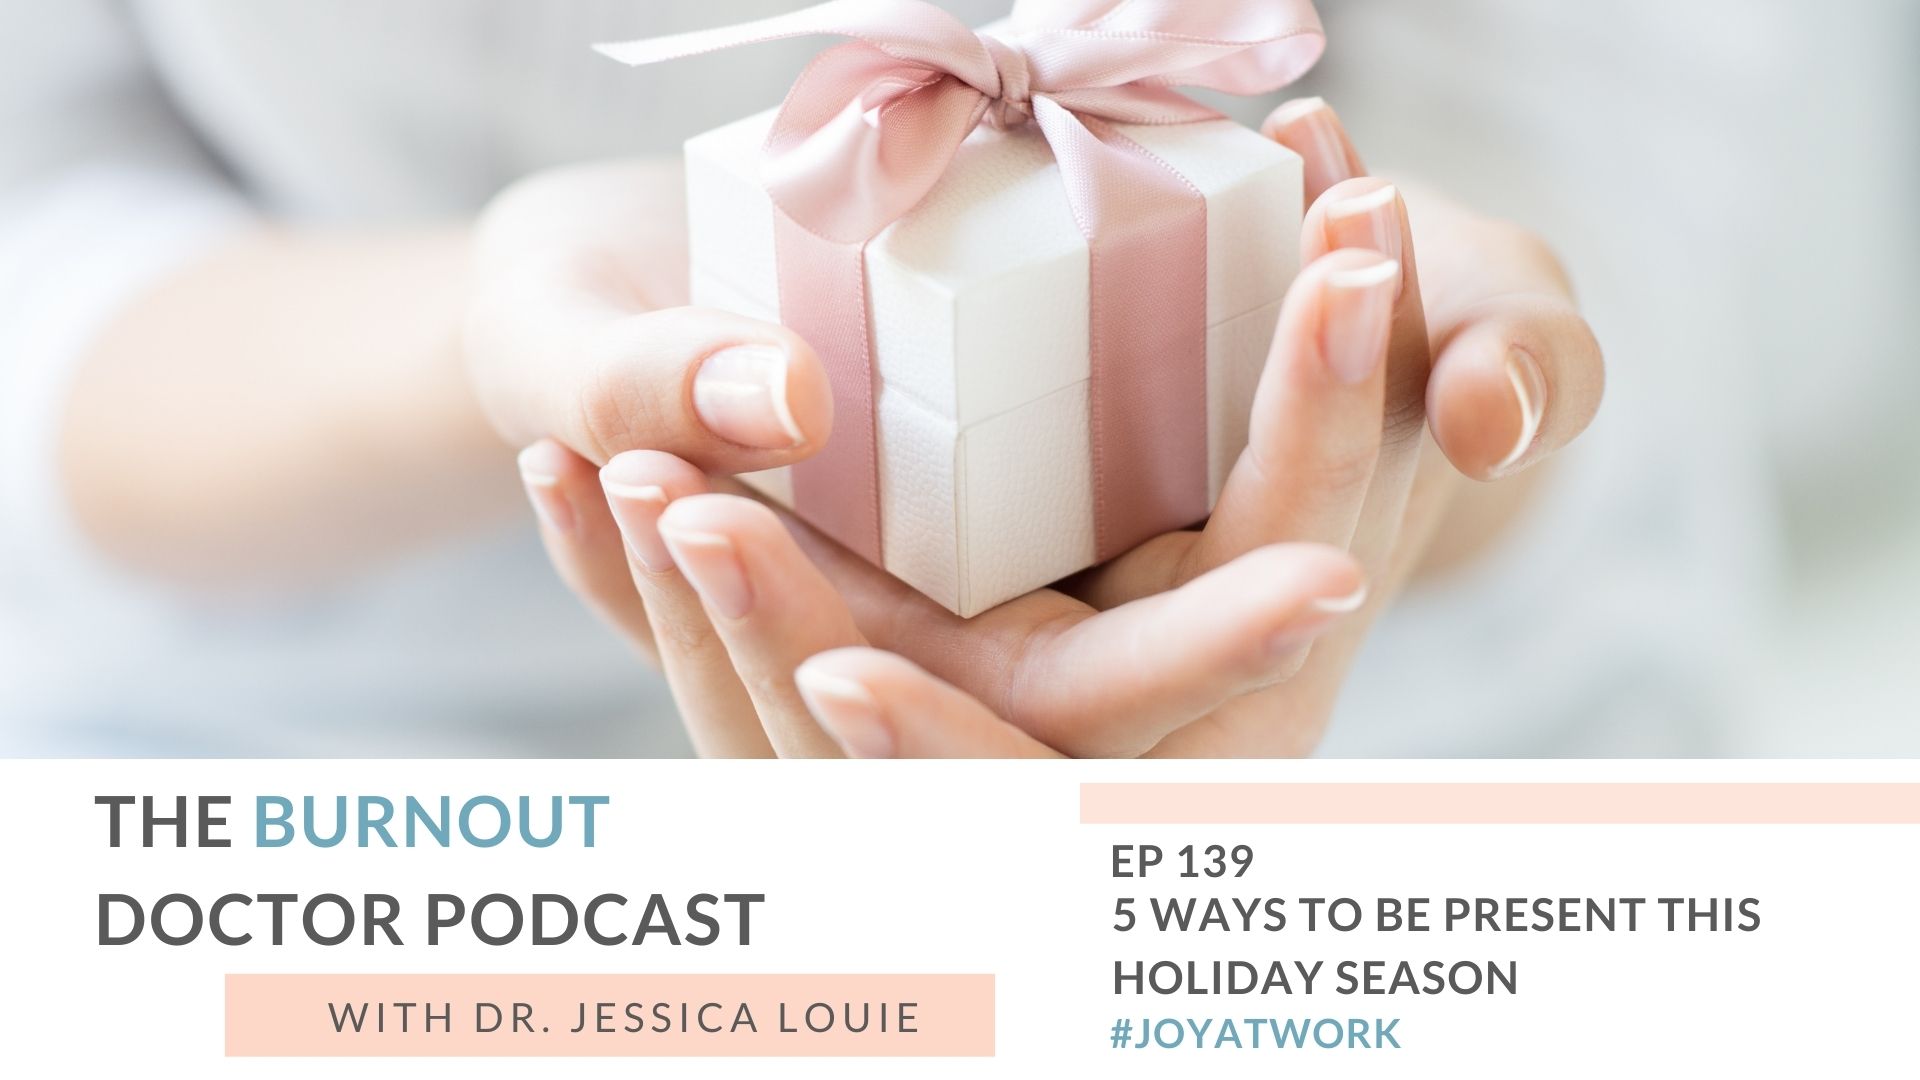 5 Ways to be present during holiday gatherings this season. How to feel present during holiday events. How to prevent holiday from passing with a blur. The Burnout Doctor Podcast with Dr. Jessica Louie. Holiday burnout help.